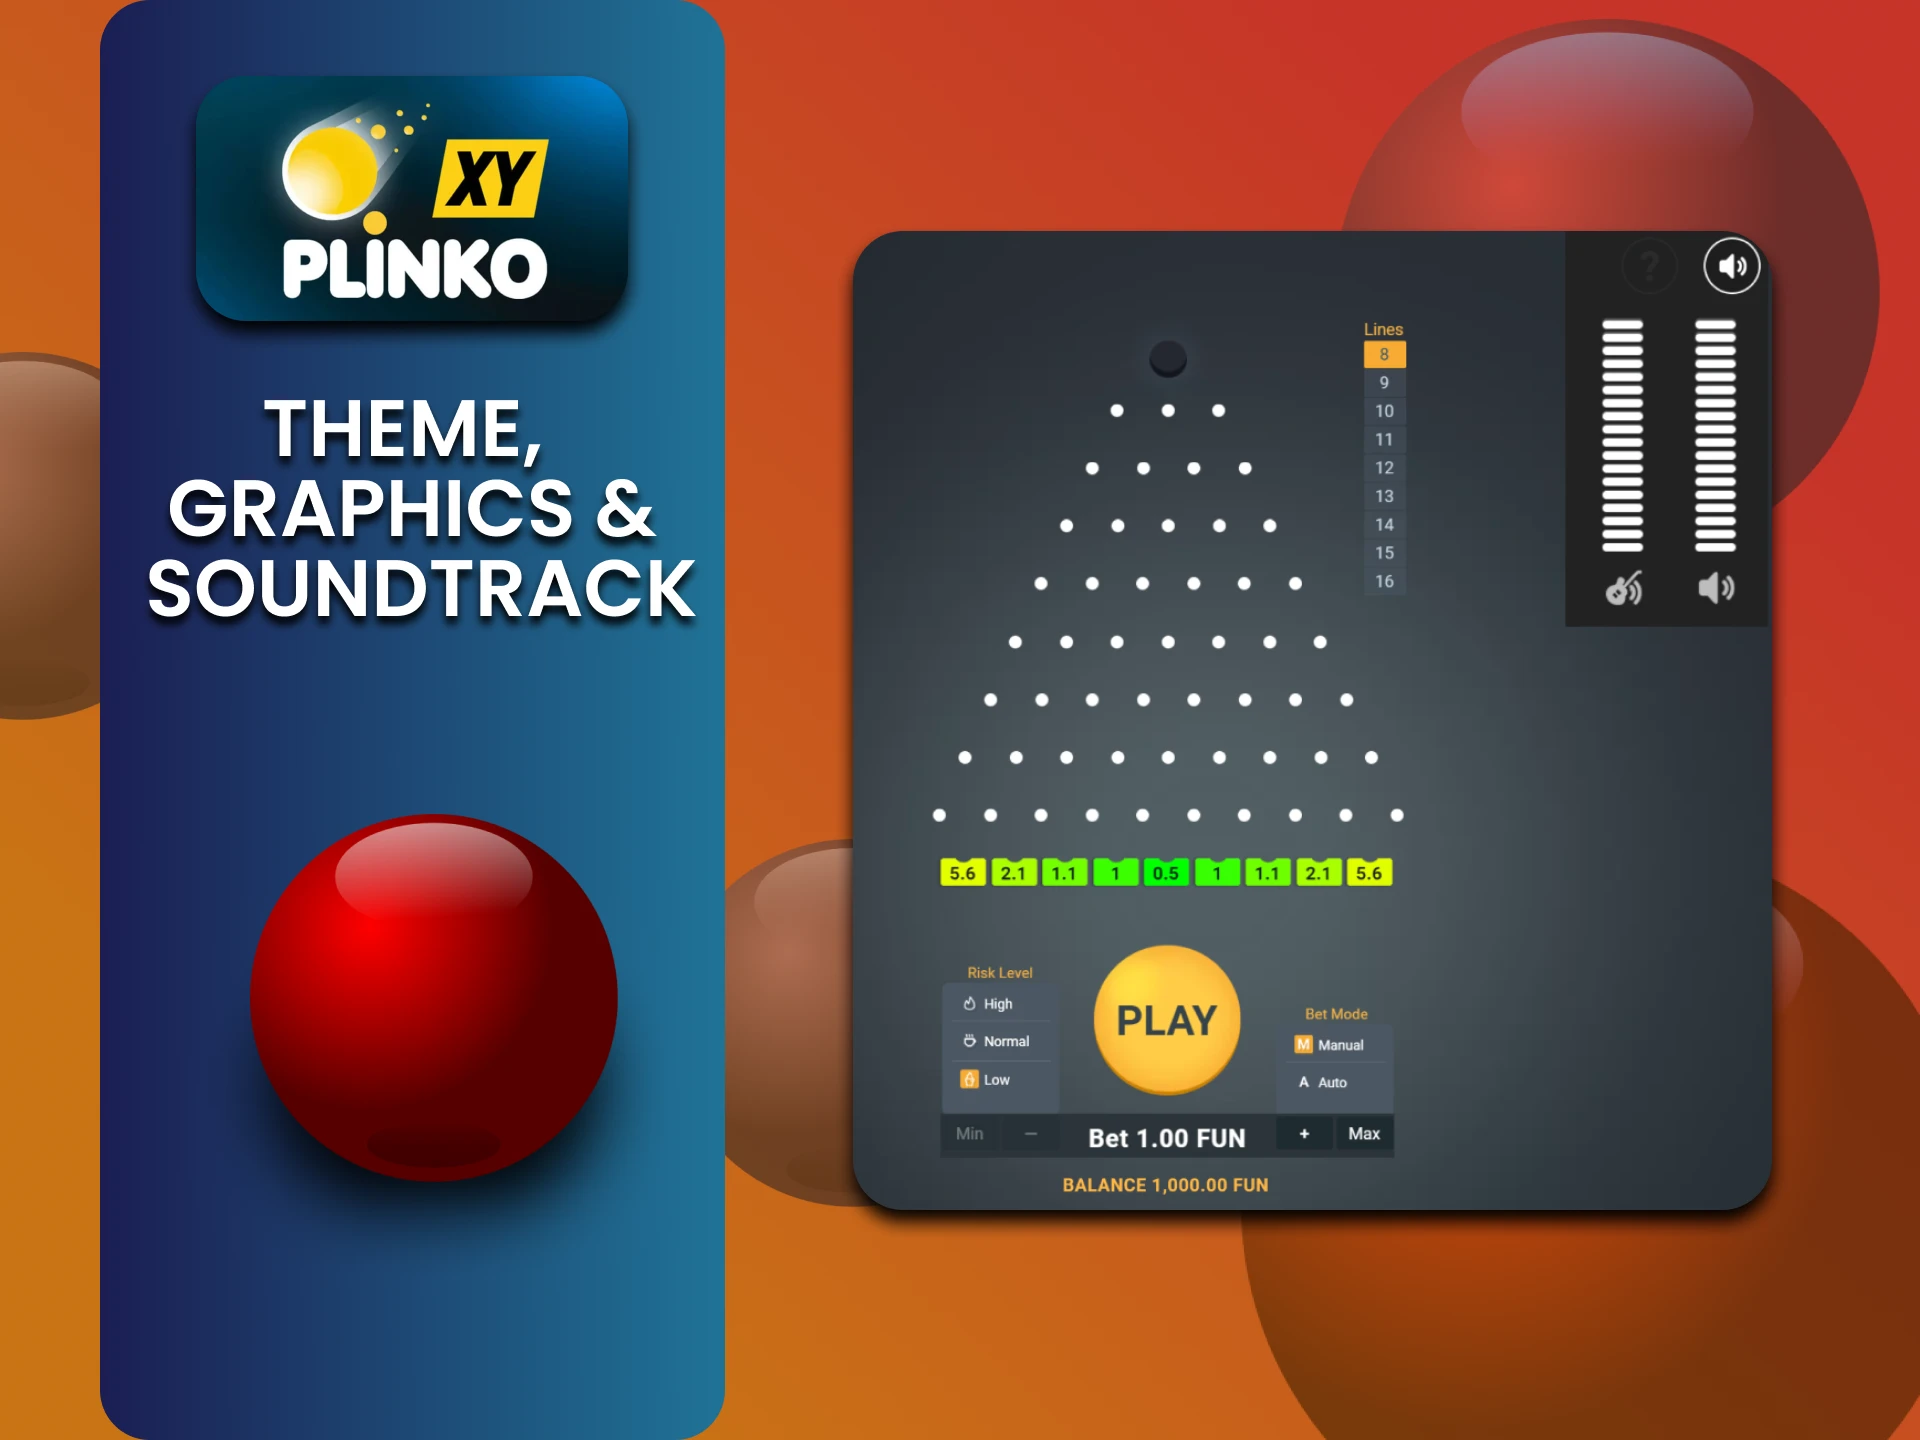 We will tell you about the sound and visuals in the Plinko XY game.